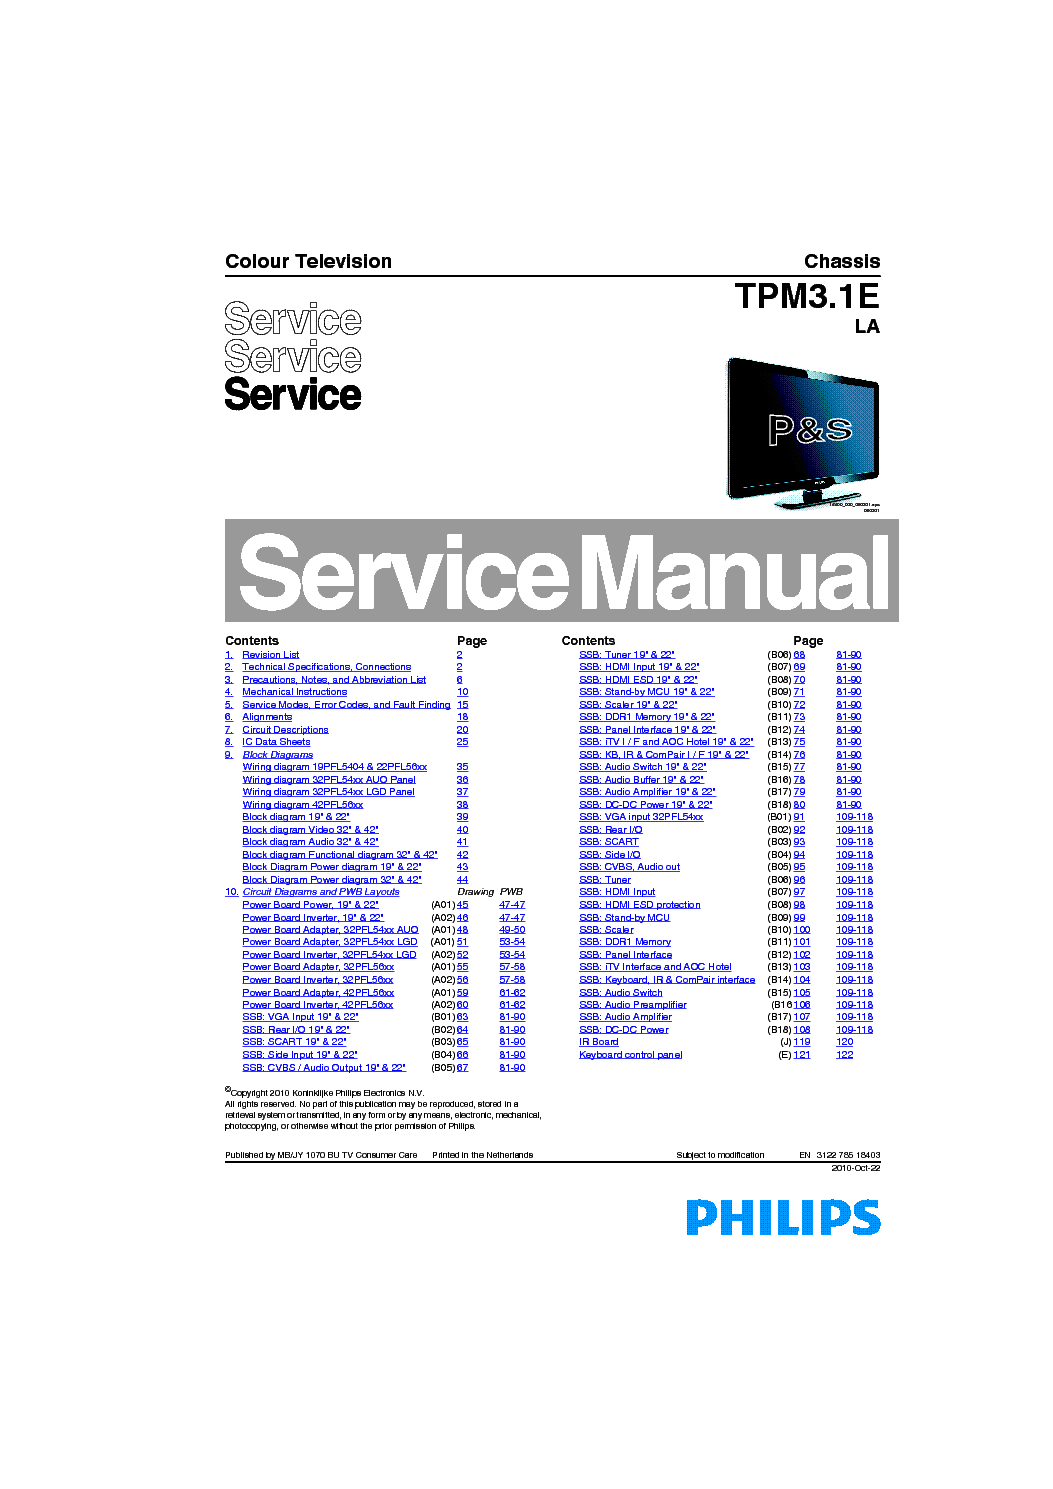 PHILIPS TPM3.1ELA service manual (1st page)